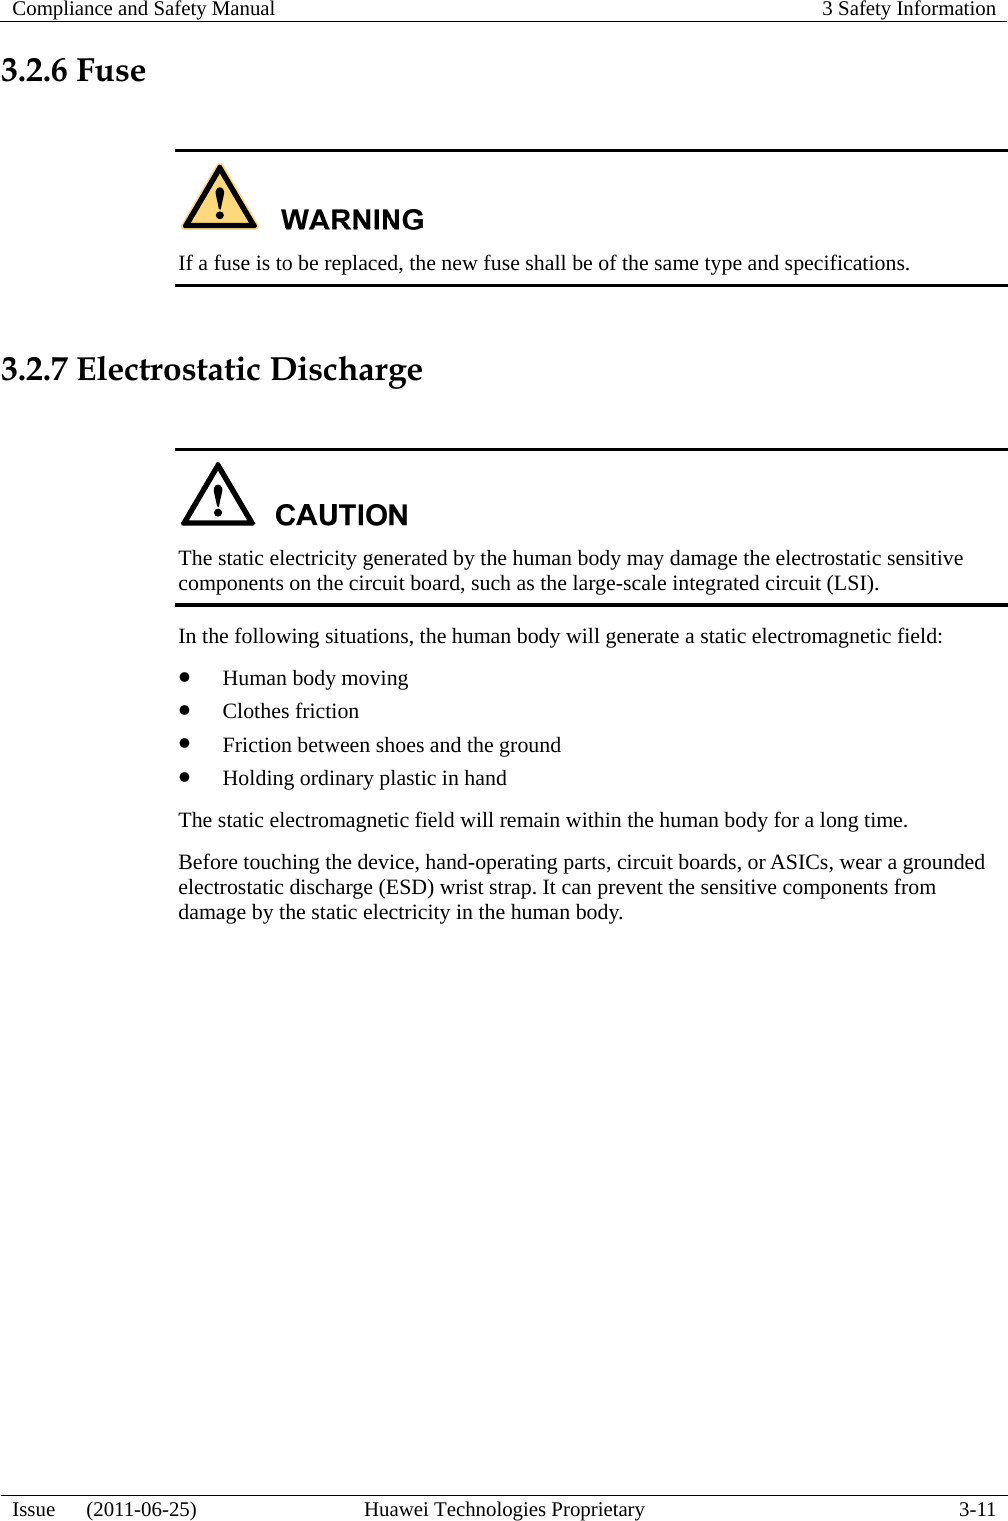 Compliance and Safety Manual  3 Safety Information  Issue   (2011-06-25)  Huawei Technologies Proprietary  3-11 3.2.6 Fuse   If a fuse is to be replaced, the new fuse shall be of the same type and specifications.  3.2.7 Electrostatic Discharge   The static electricity generated by the human body may damage the electrostatic sensitive components on the circuit board, such as the large-scale integrated circuit (LSI). In the following situations, the human body will generate a static electromagnetic field: z Human body moving z Clothes friction z Friction between shoes and the ground z Holding ordinary plastic in hand The static electromagnetic field will remain within the human body for a long time. Before touching the device, hand-operating parts, circuit boards, or ASICs, wear a grounded electrostatic discharge (ESD) wrist strap. It can prevent the sensitive components from damage by the static electricity in the human body. 